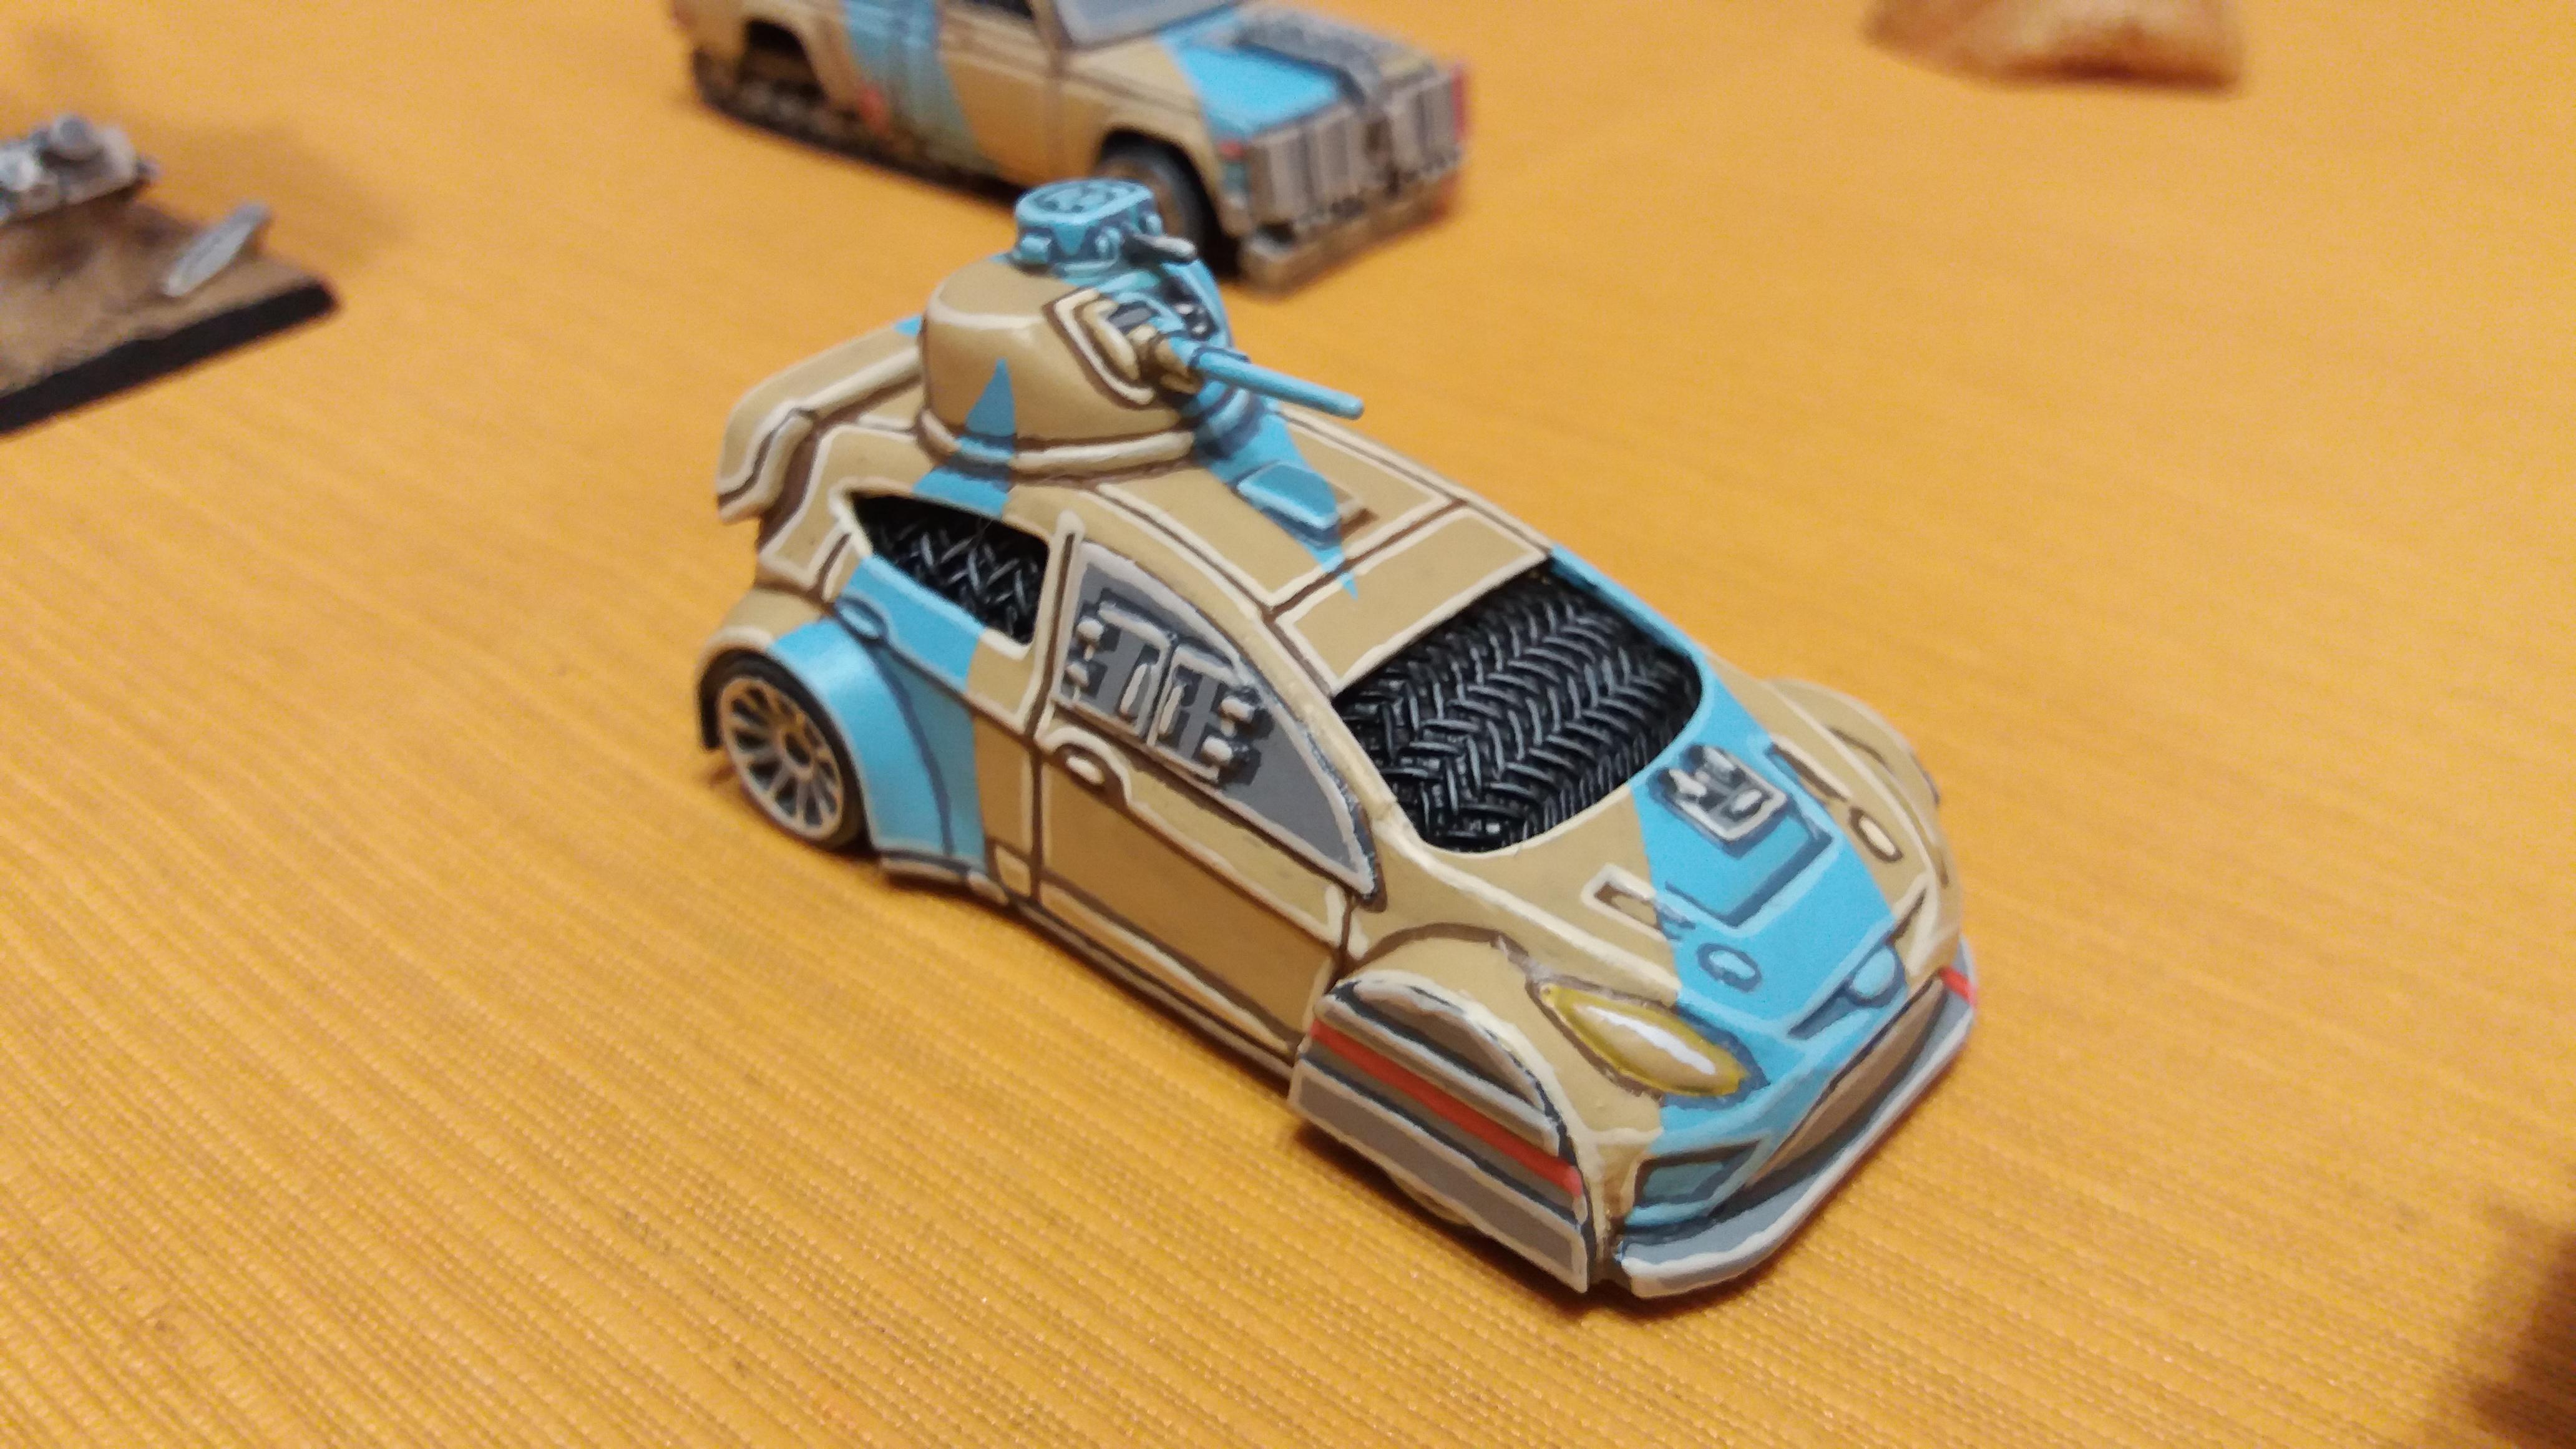 Gaslands Hot Wheels Conversions (including a mid-project DISASTER!) 